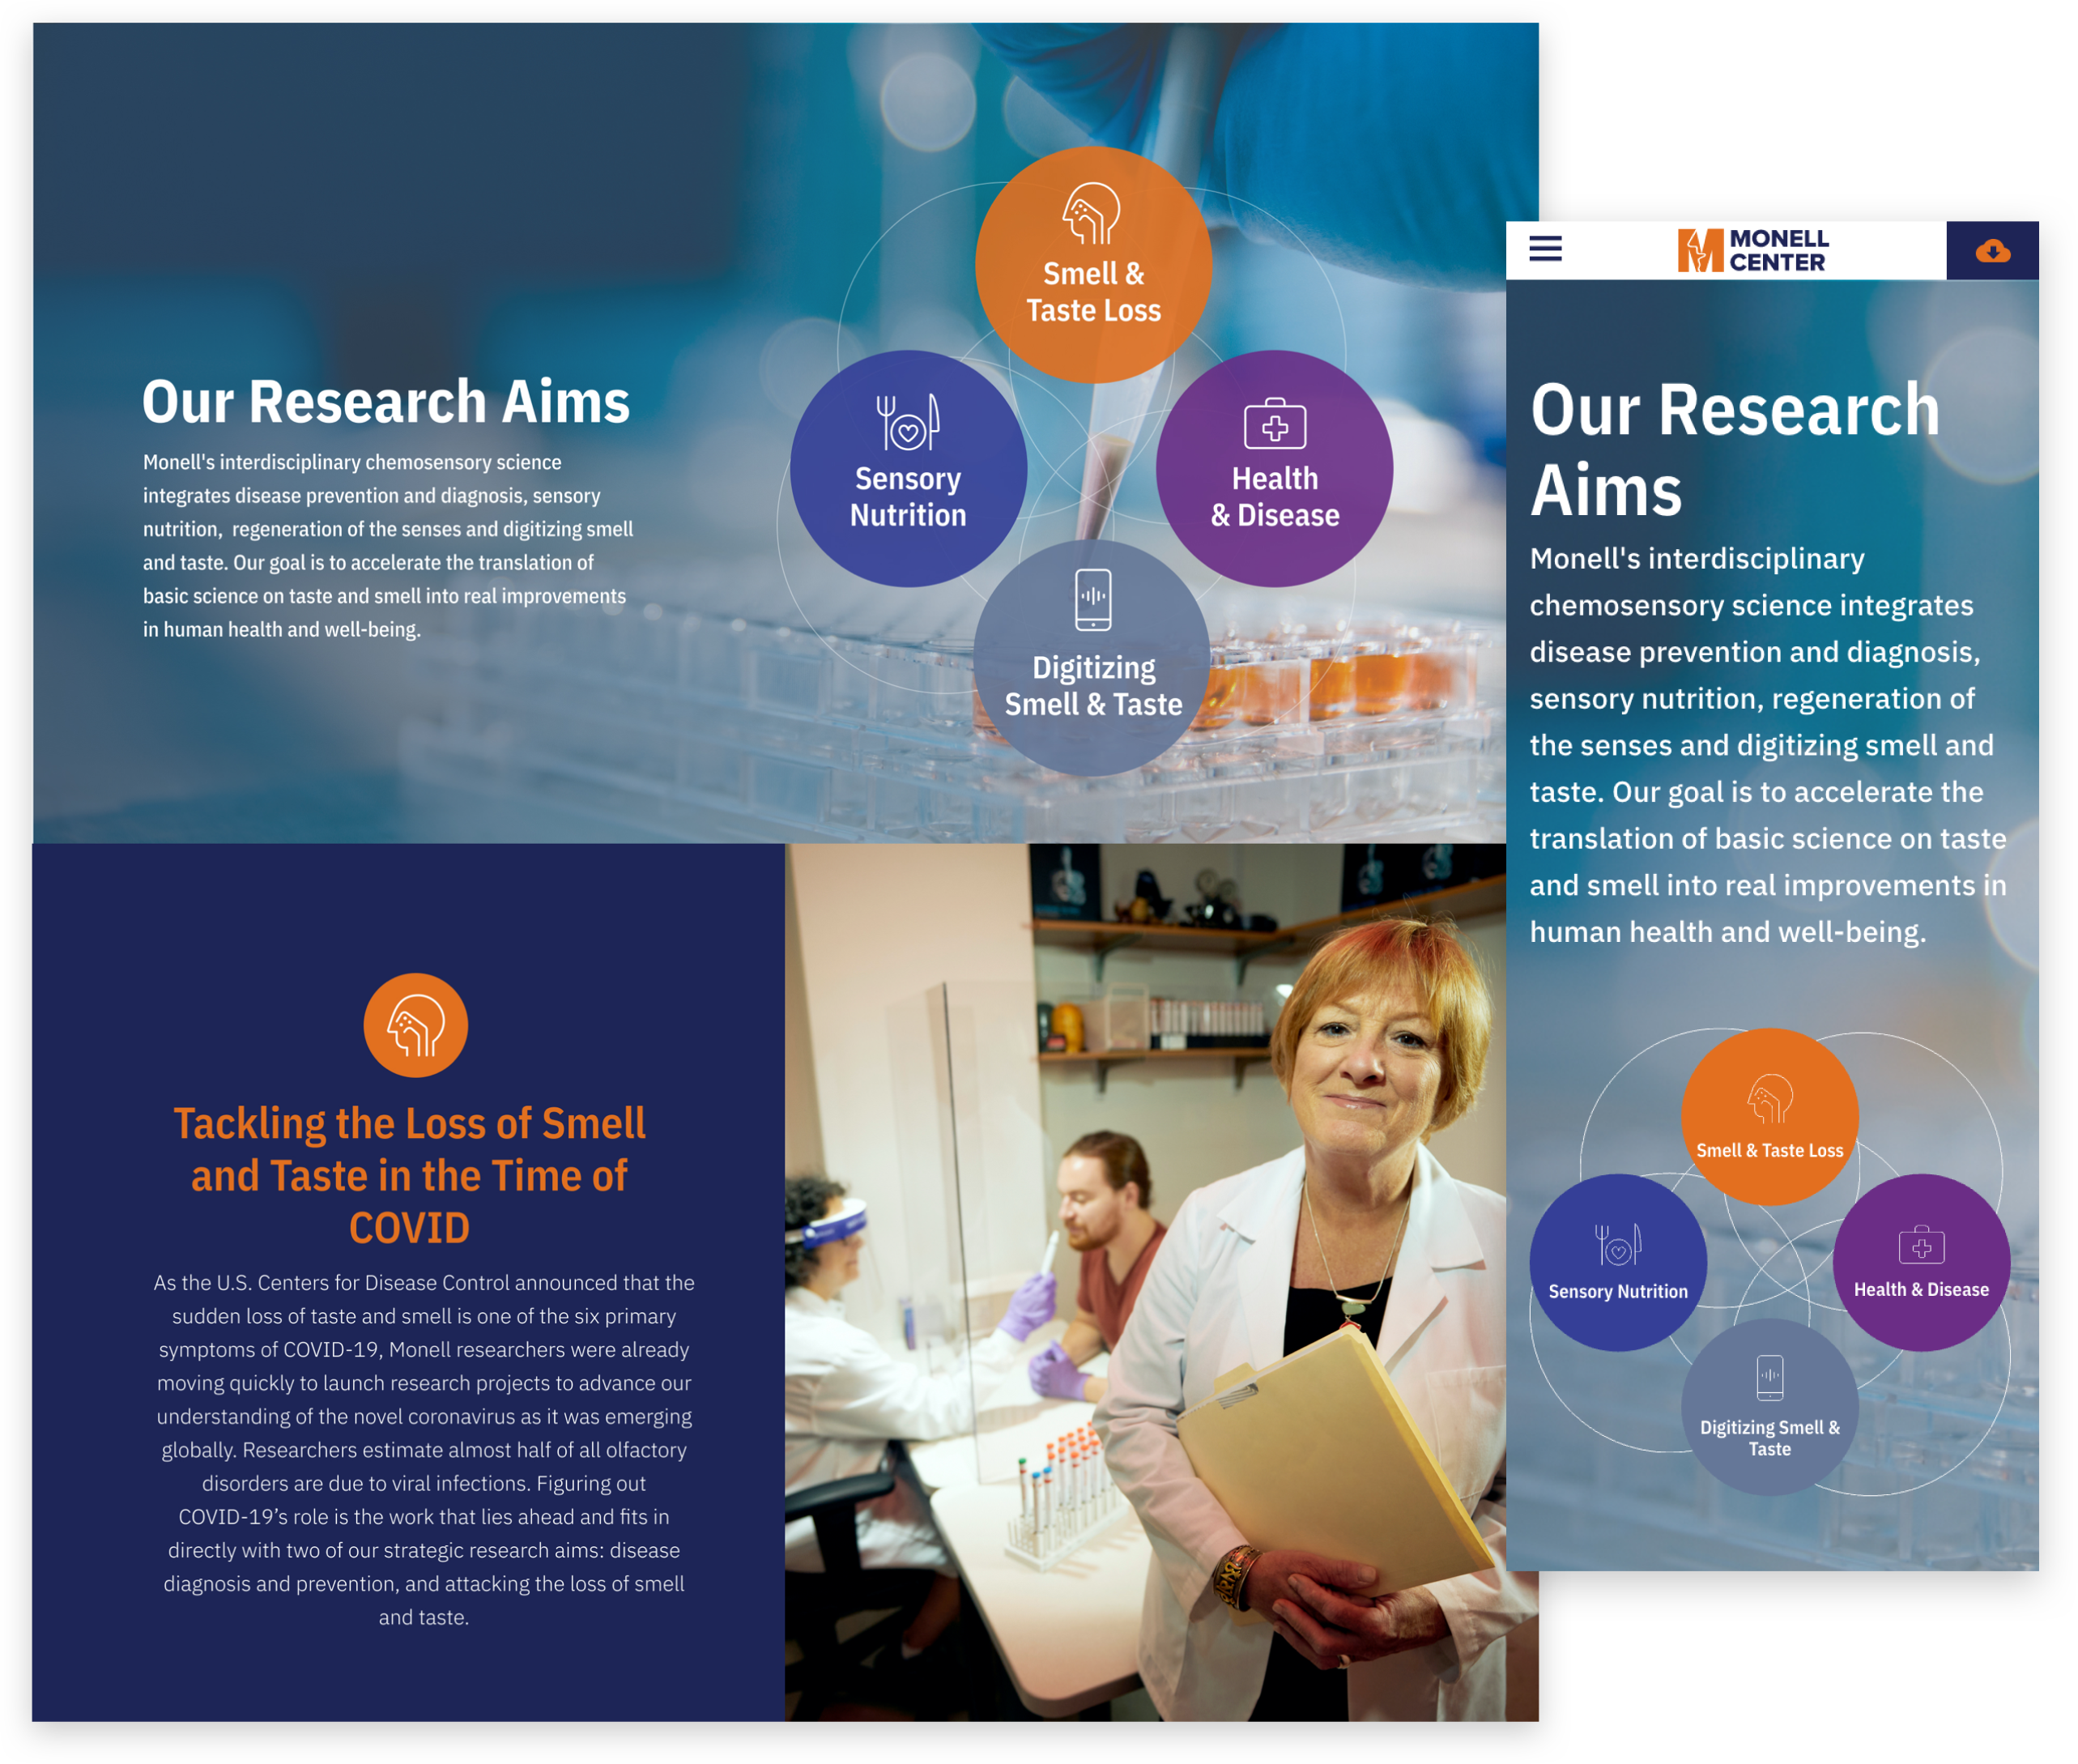 The desktop and mobile views of the "Our Research Aims" section of the report, with a brief paragraph explanation and four different colored circles with white line icons of each of the research goals